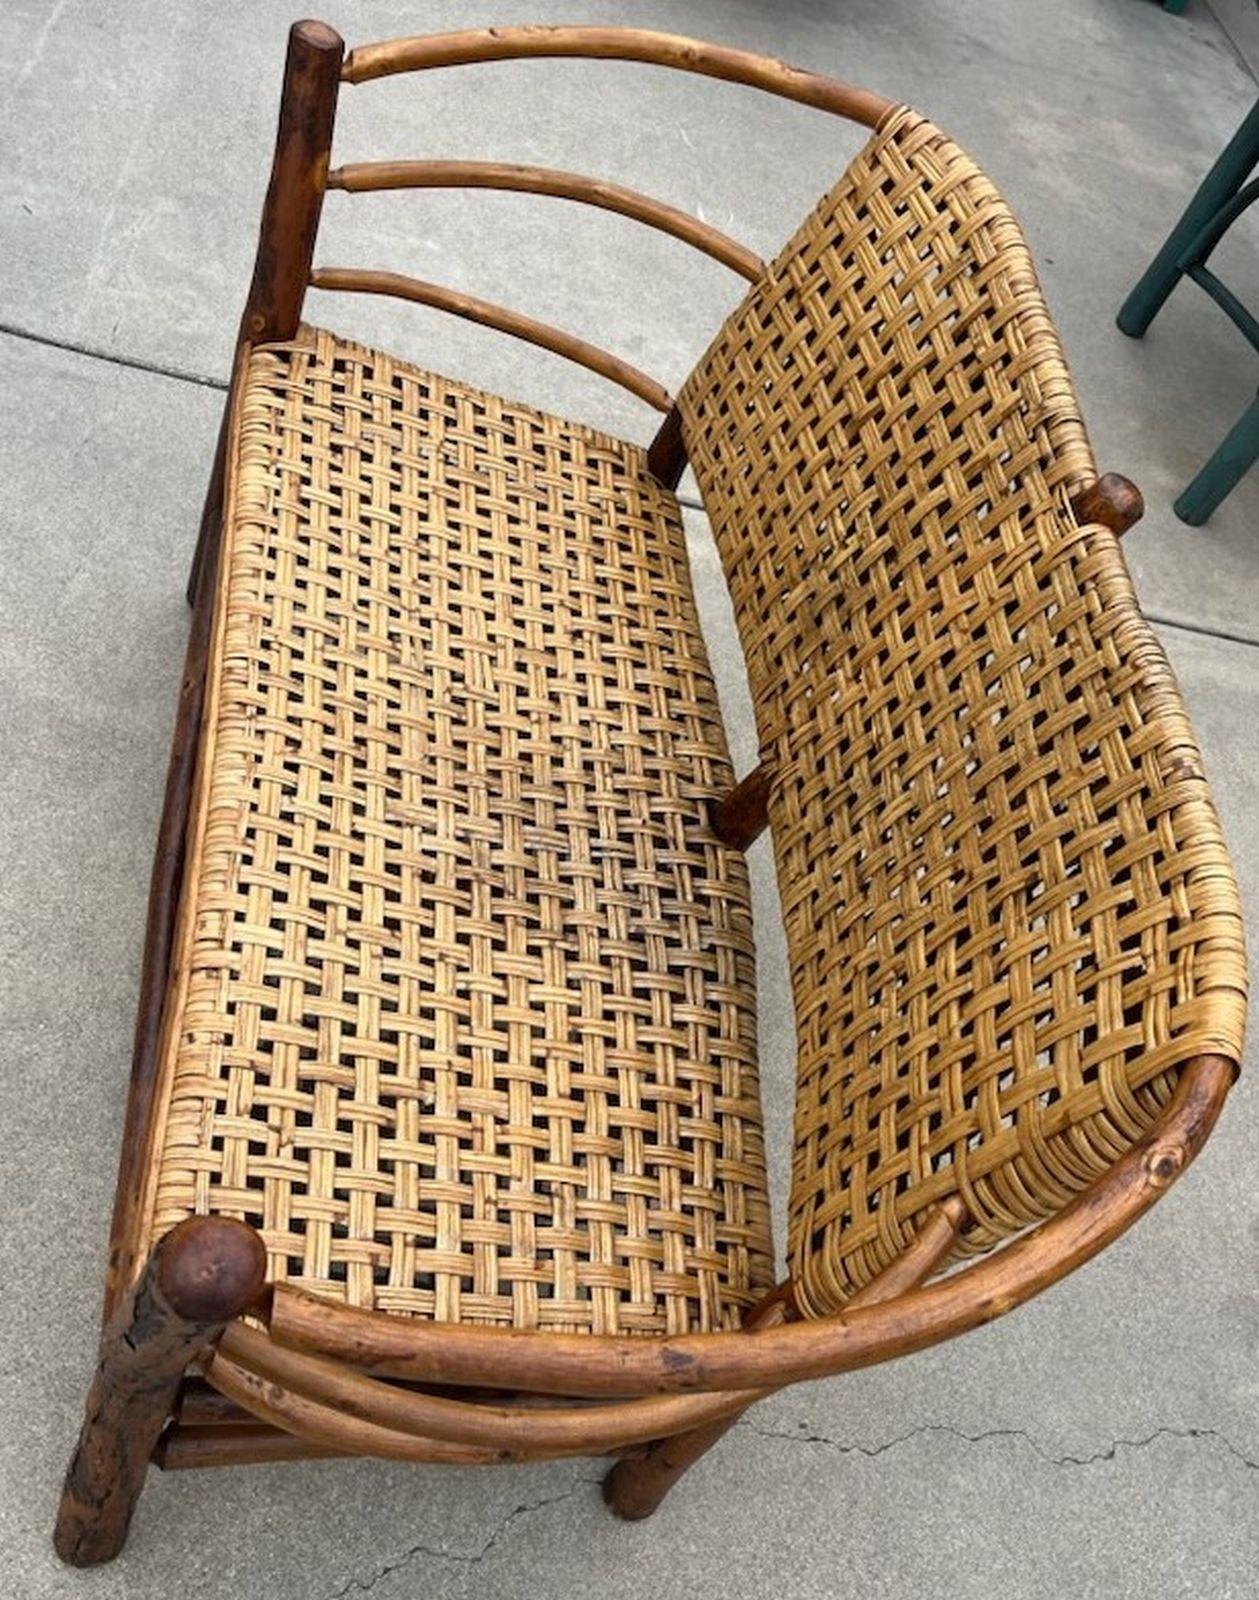 Great Marysville old hickory settee. Stamp is present on hickory.
Very comfortable, Great condition.
Would be look nice in a country home or Ranch home